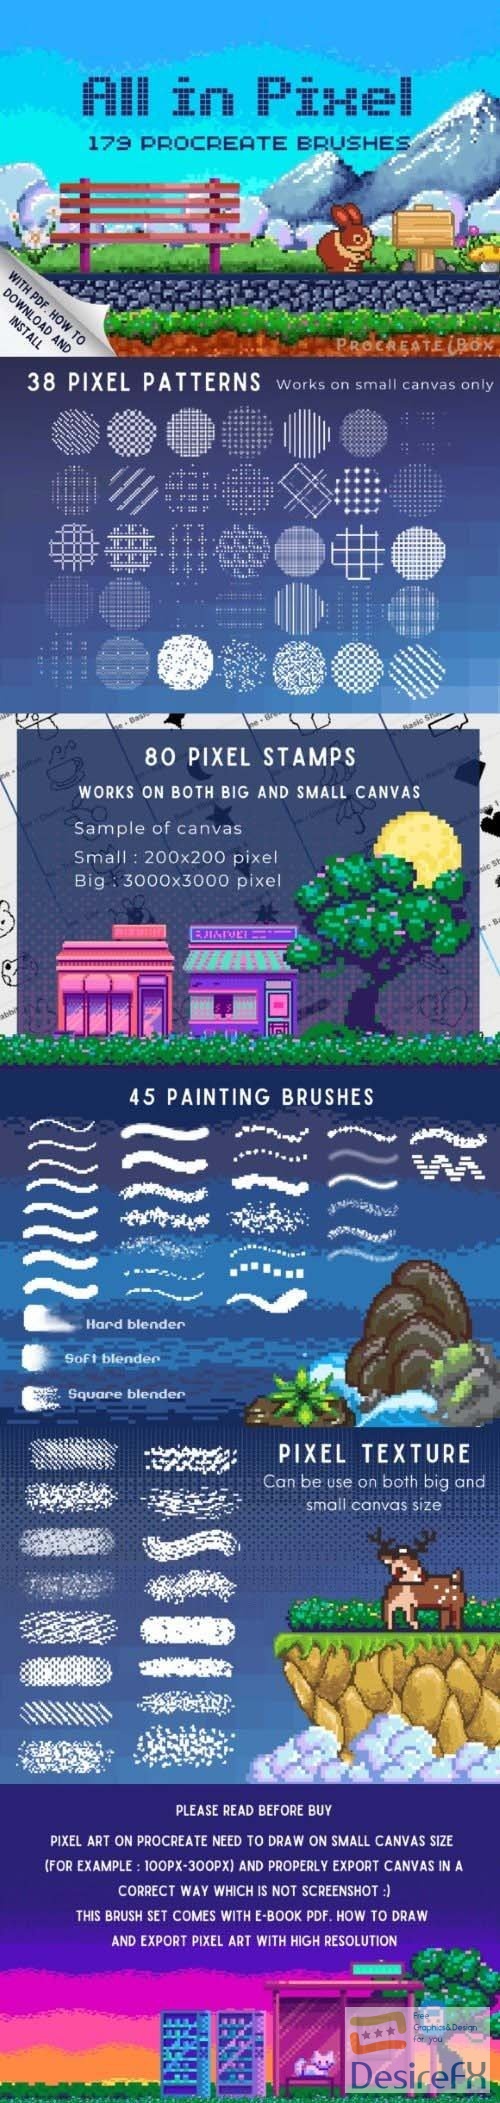 Procreate Pixel Brushes All in Pixel